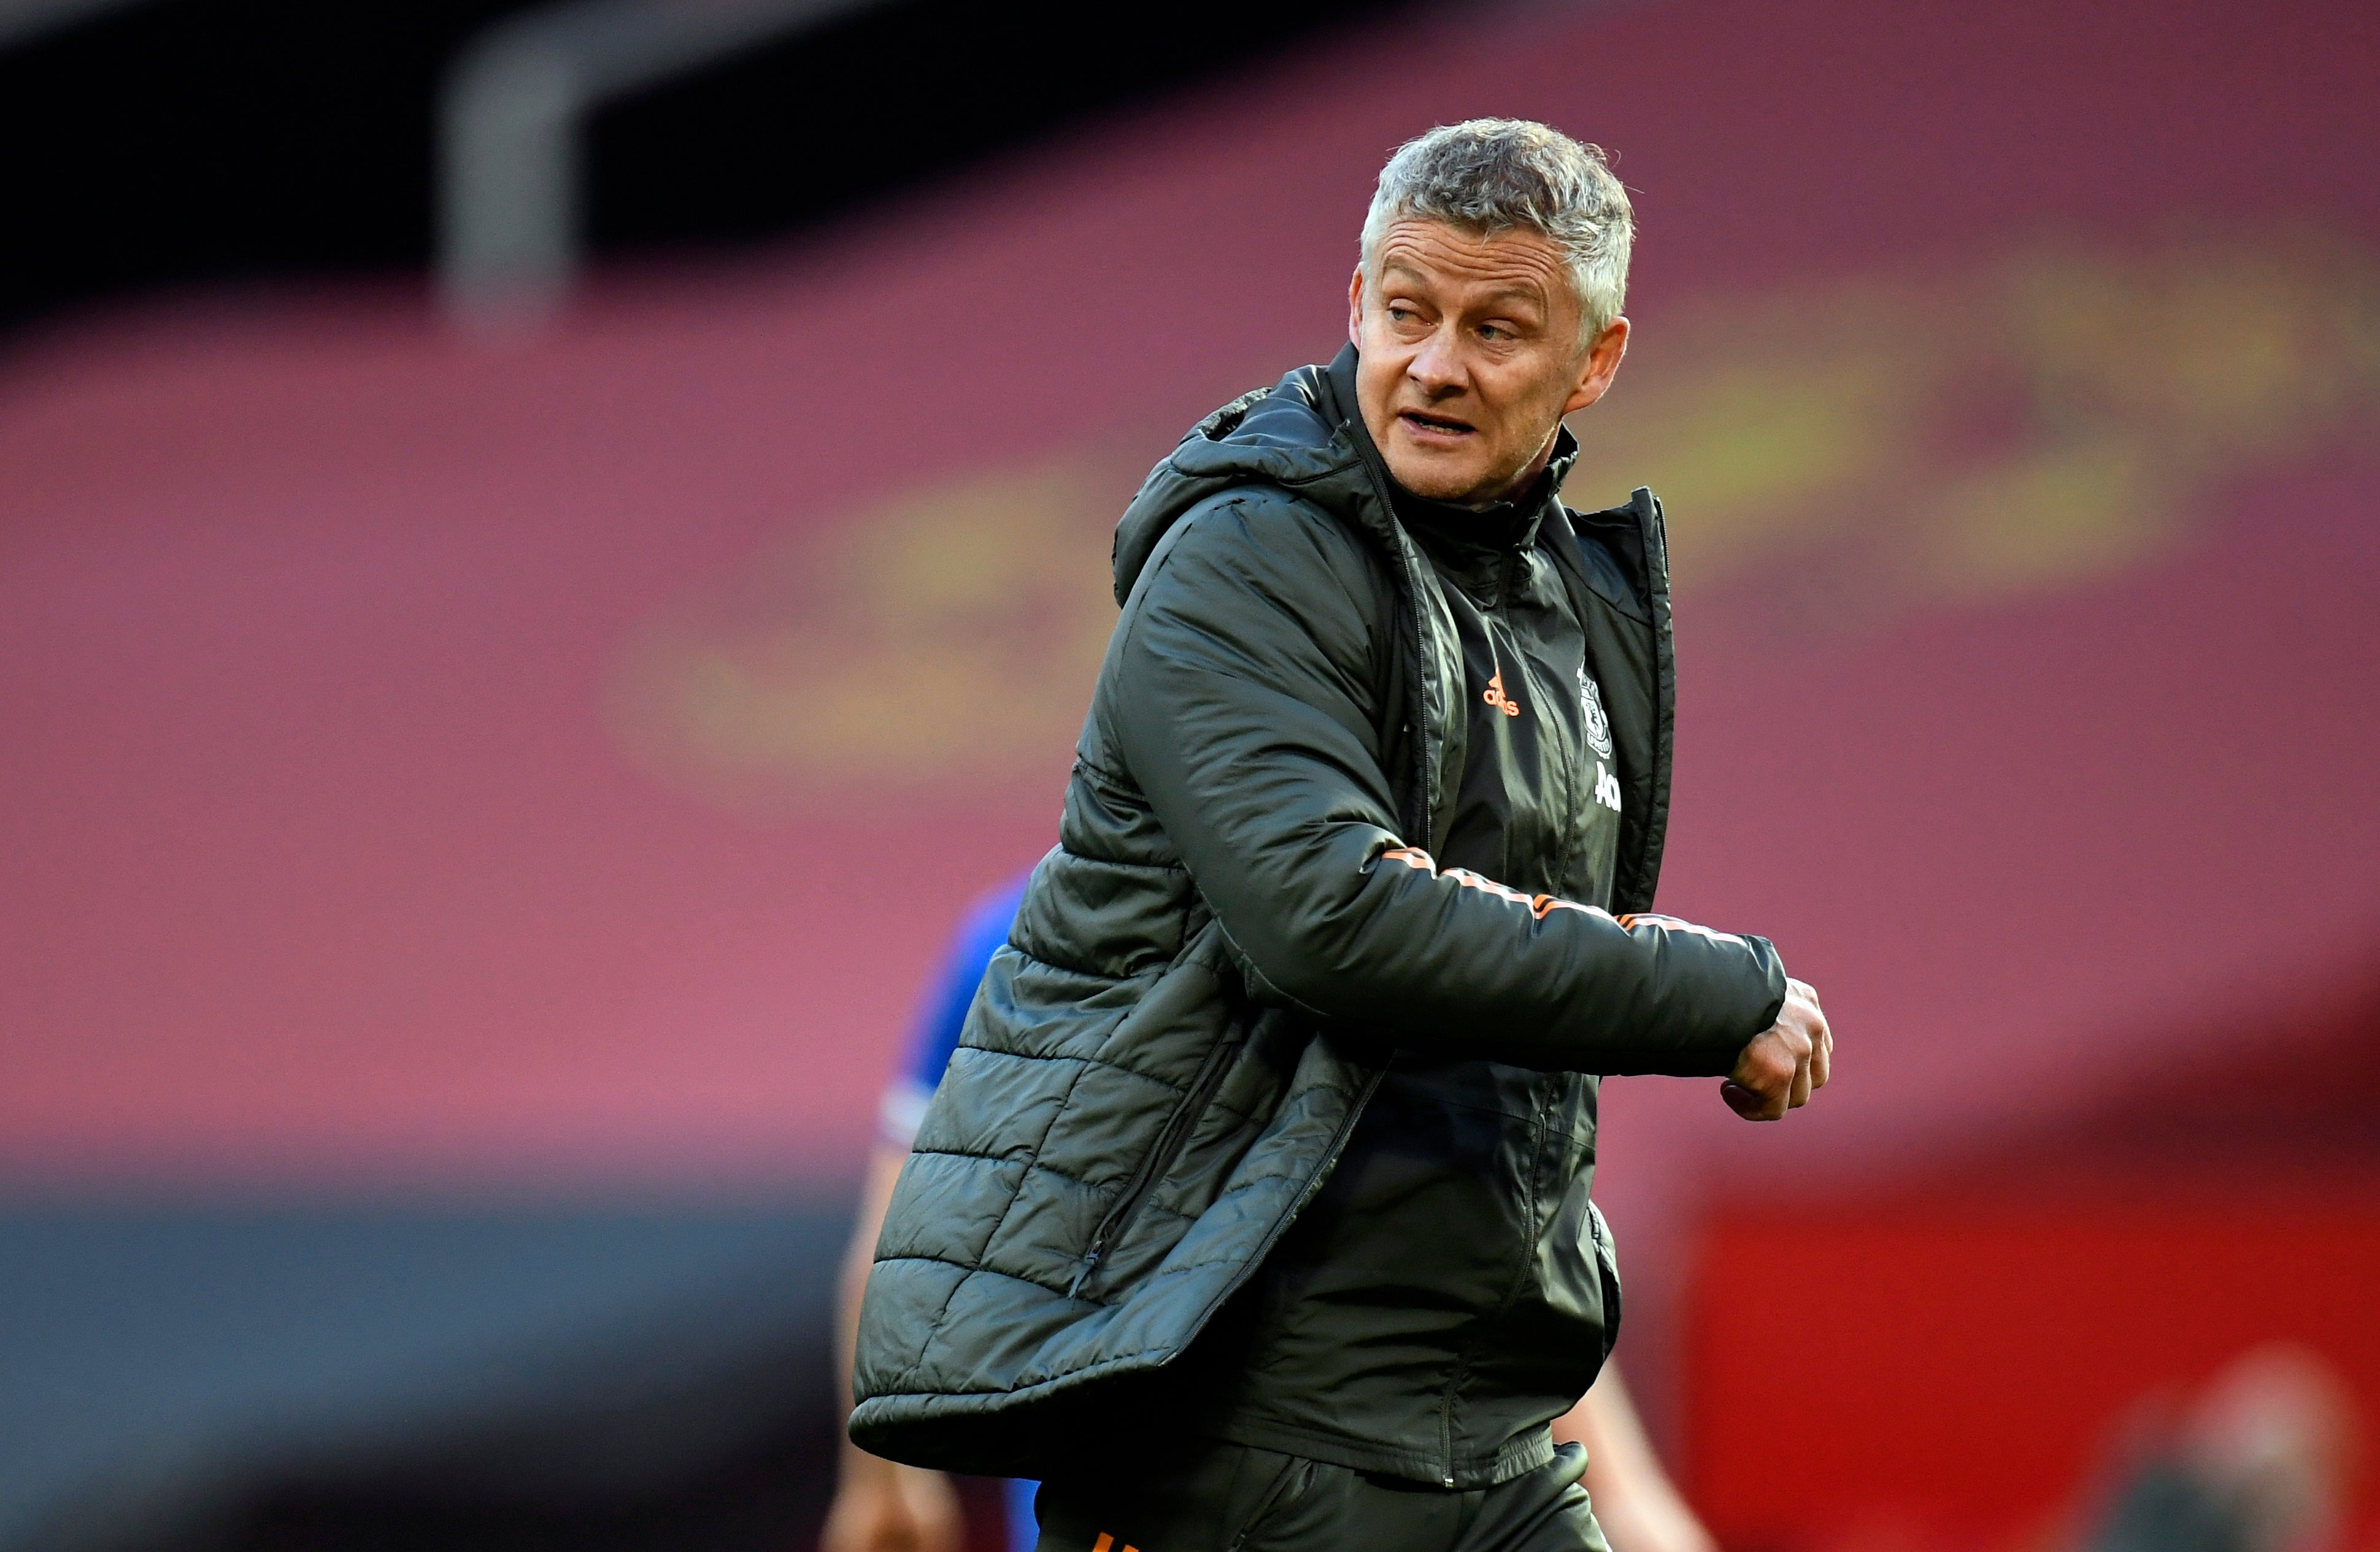 Ole Gunnar Solskjaer leaves the field after defeat by Leicester